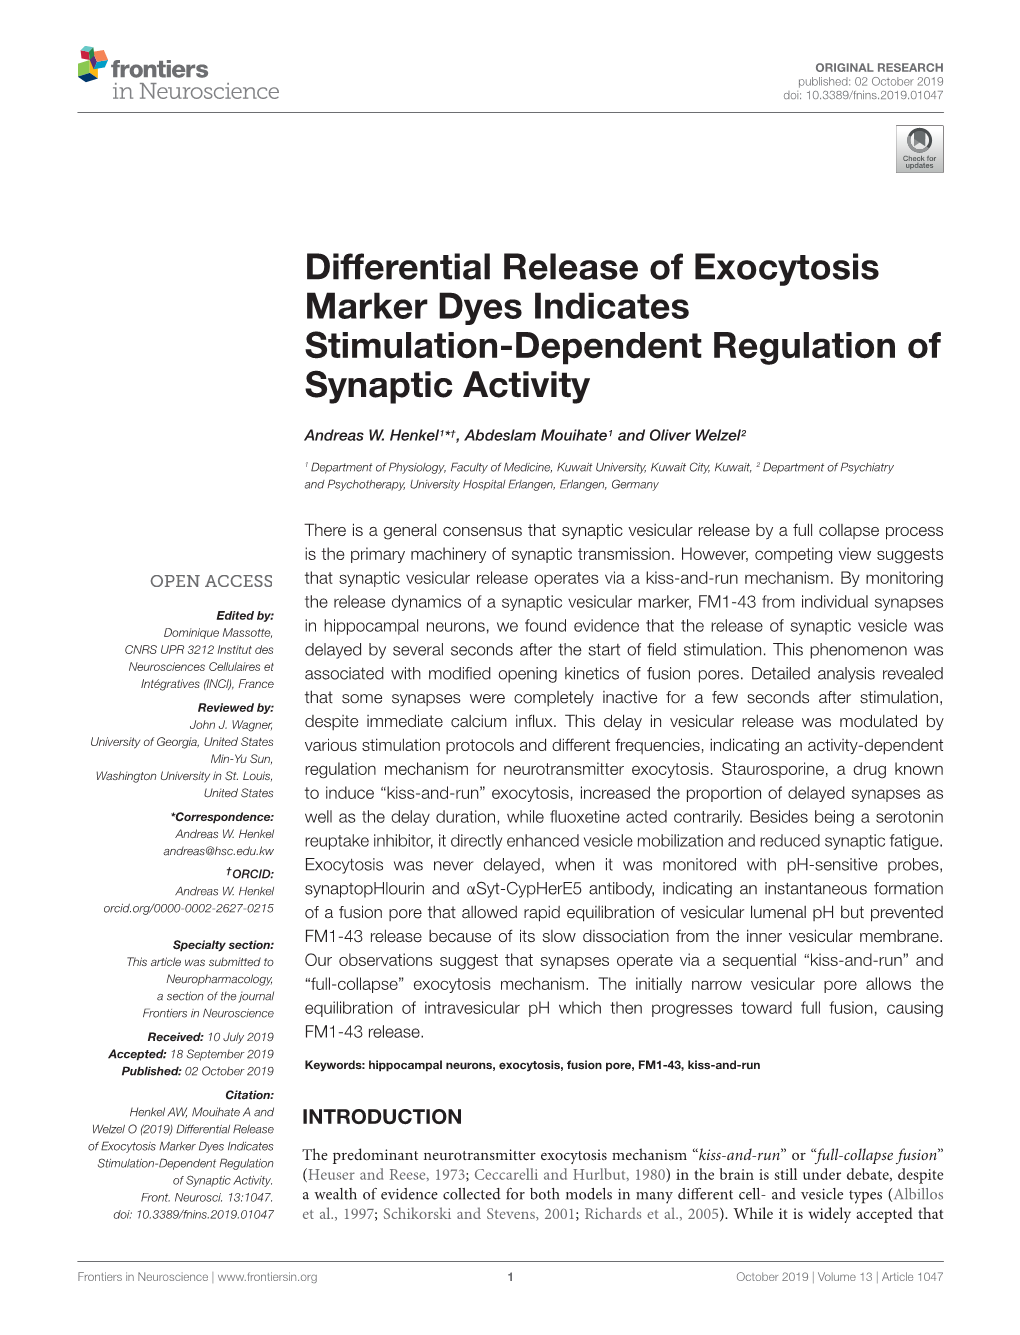 Differential Release of Exocytosis Marker Dyes Indicates Stimulation-Dependent Regulation of Synaptic Activity